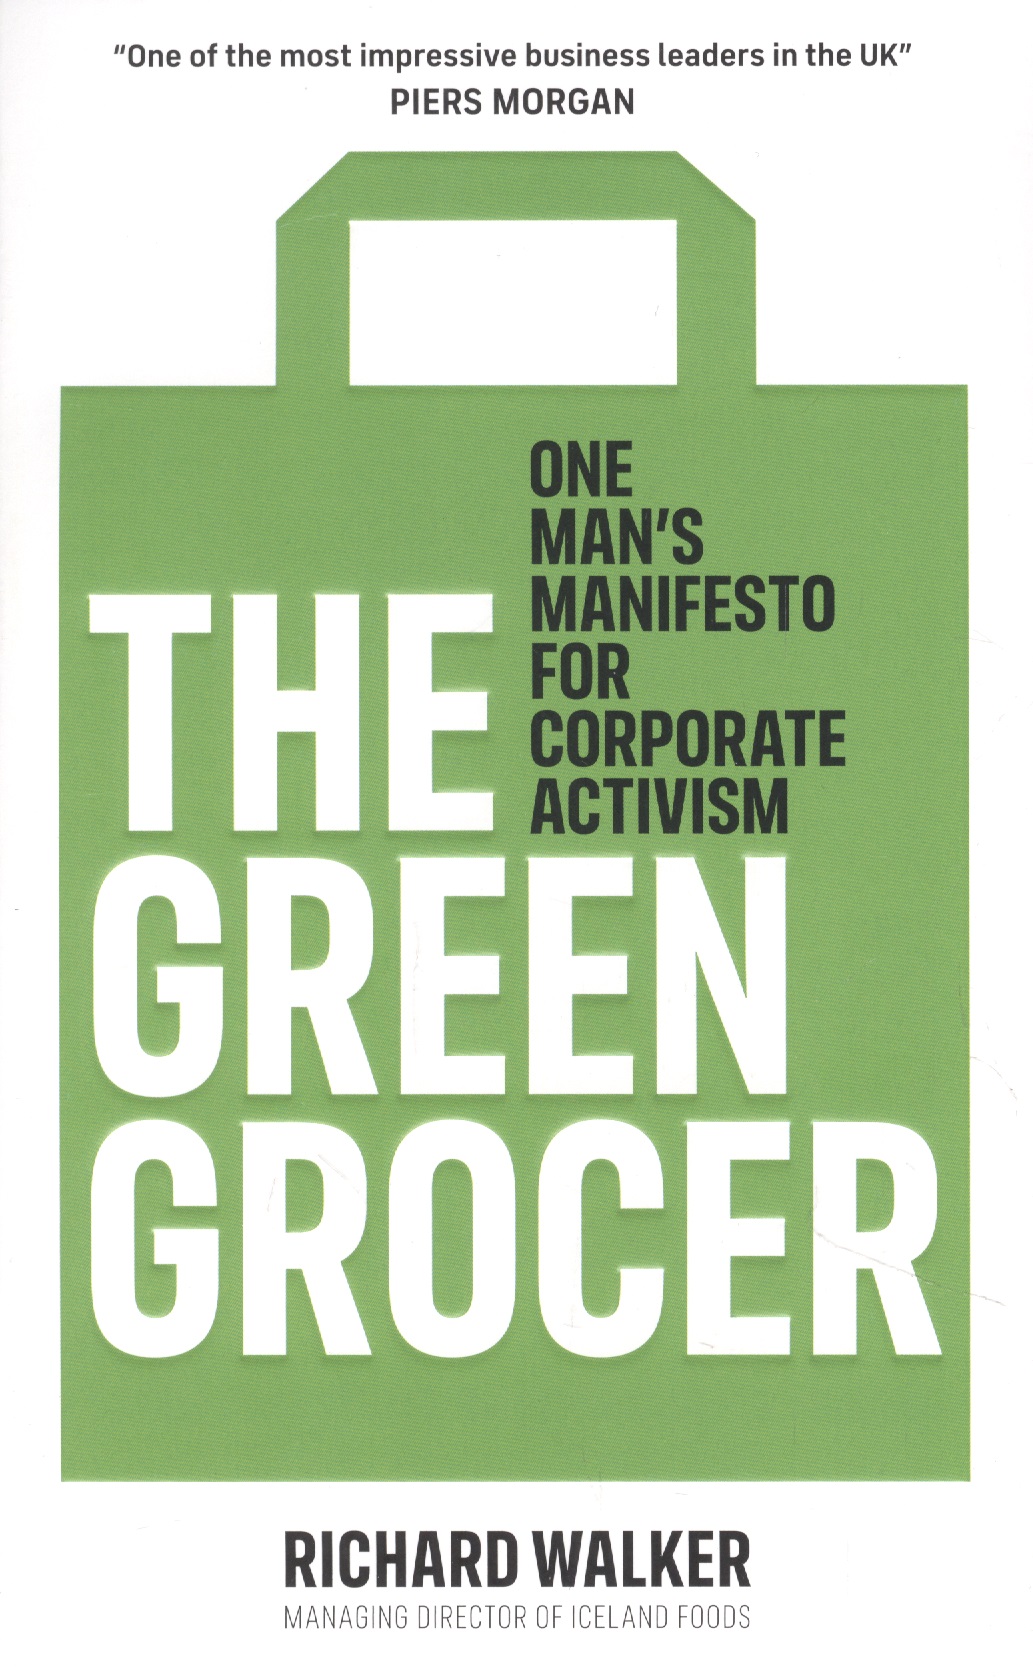 The Green Grocer. One Mans Manifesto for Corporate Activism branson r business stripped bare adventures of a global entrepreneur